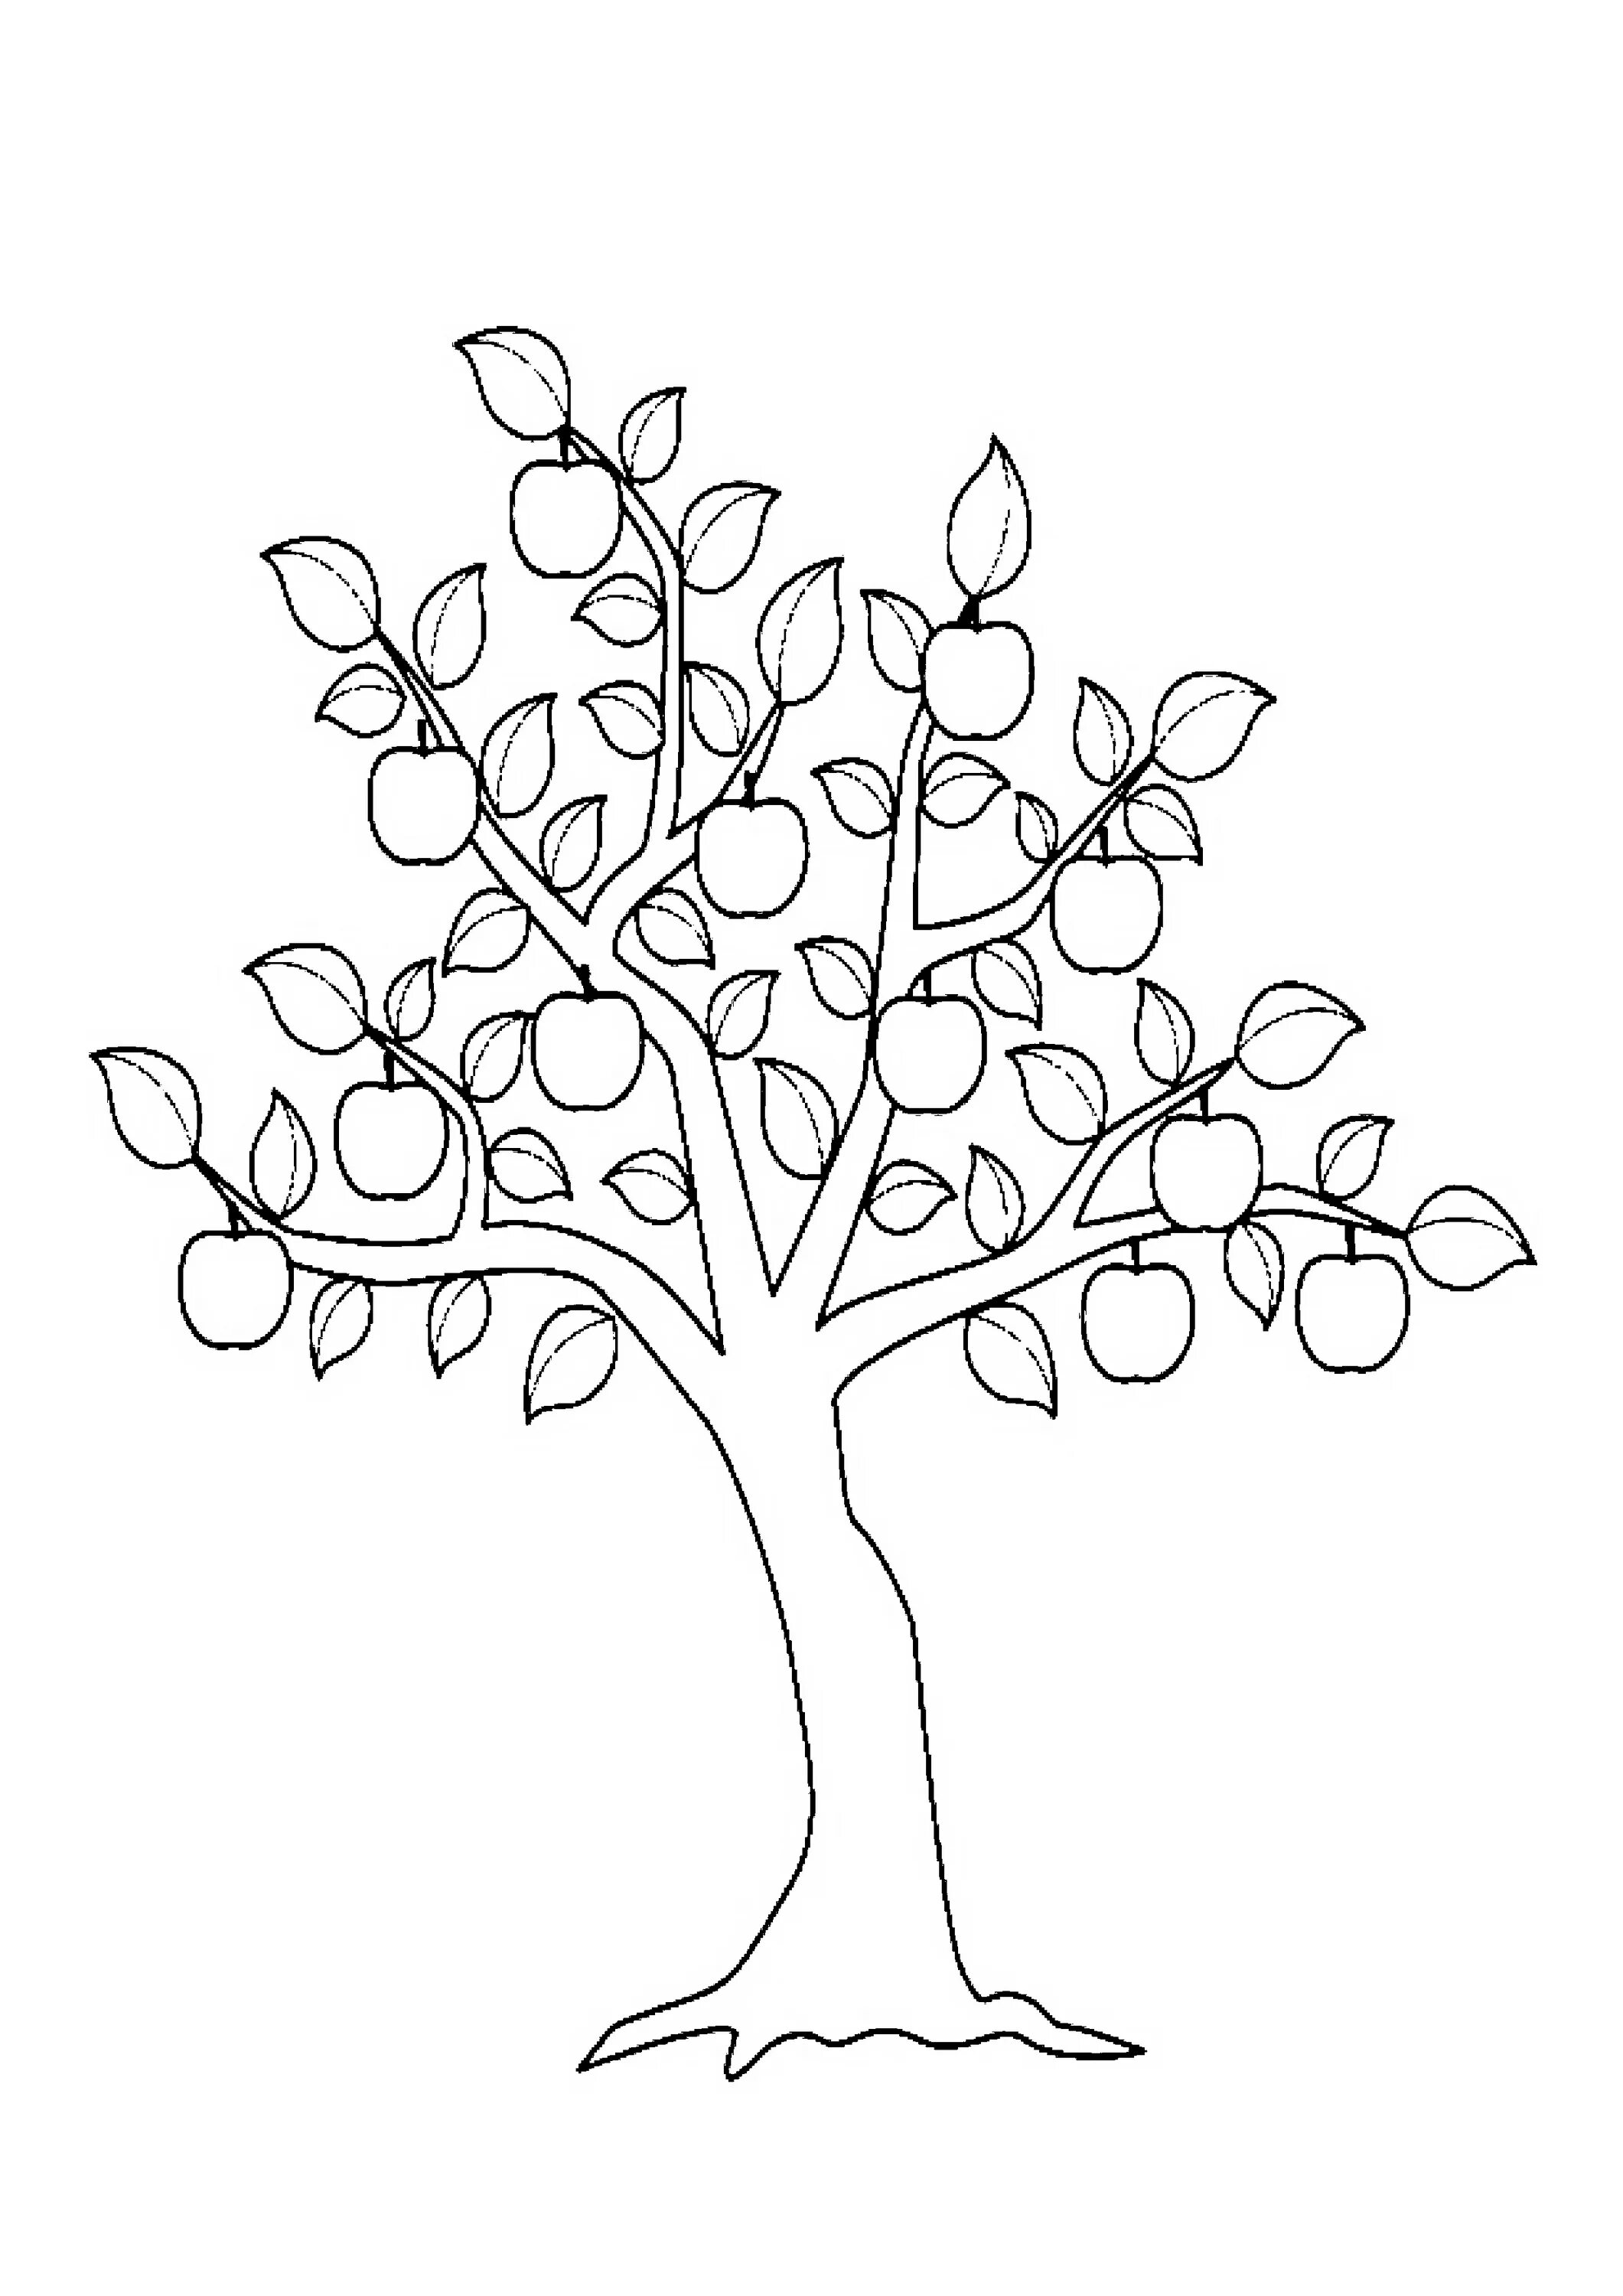 Dynamic tree coloring page for 5-6 year olds